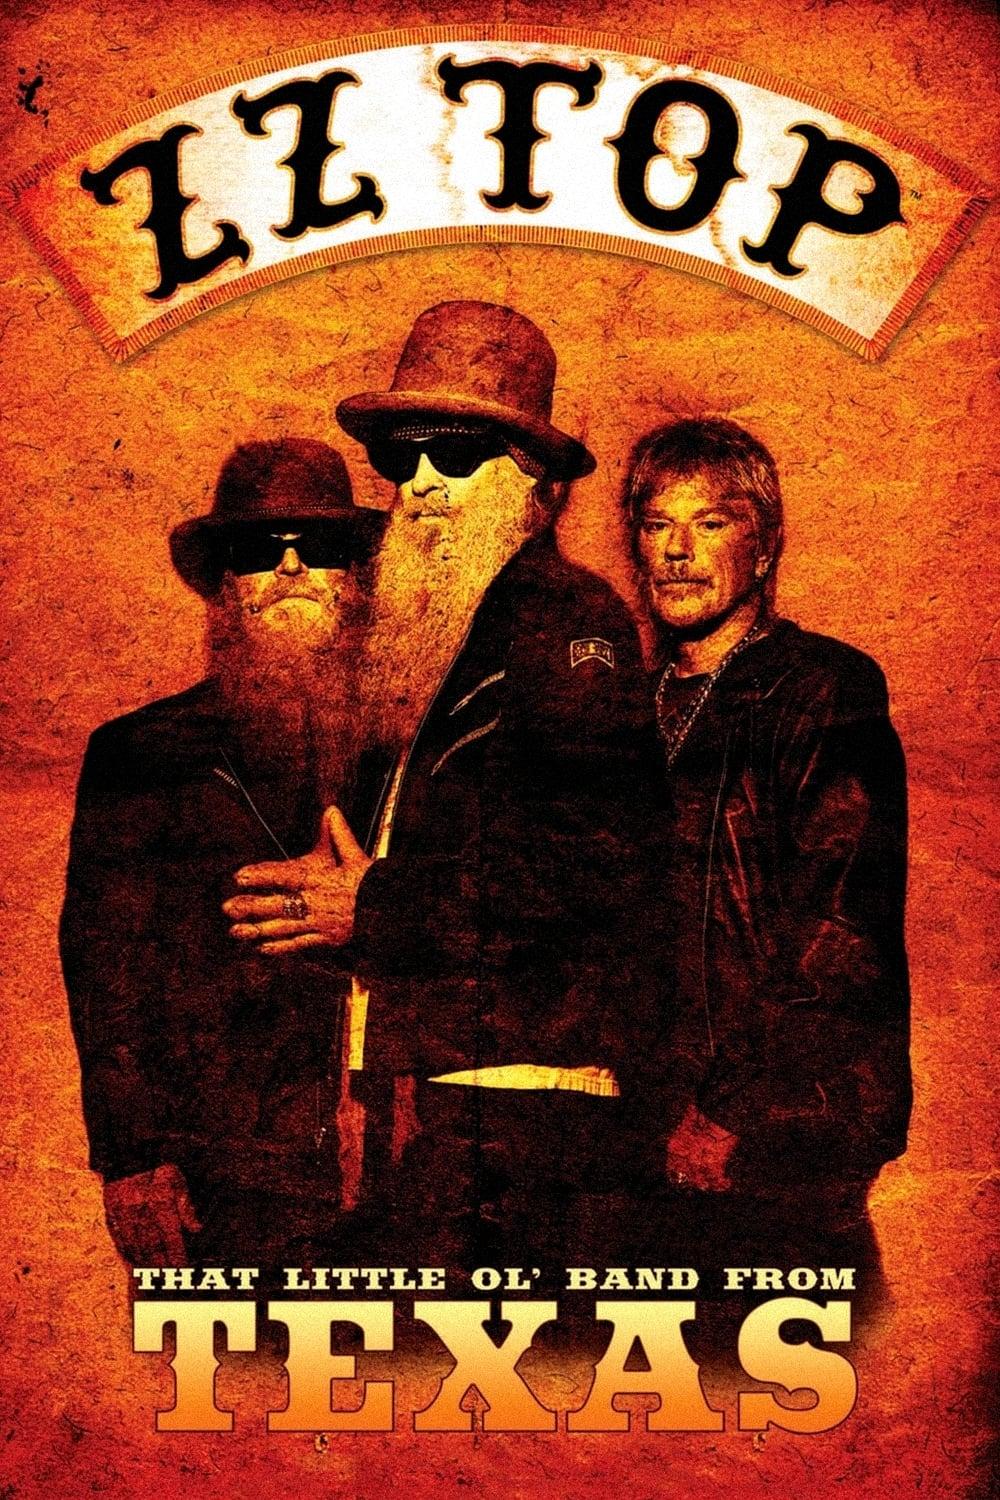 ZZ Top - That Little Ol' Band from Texas poster